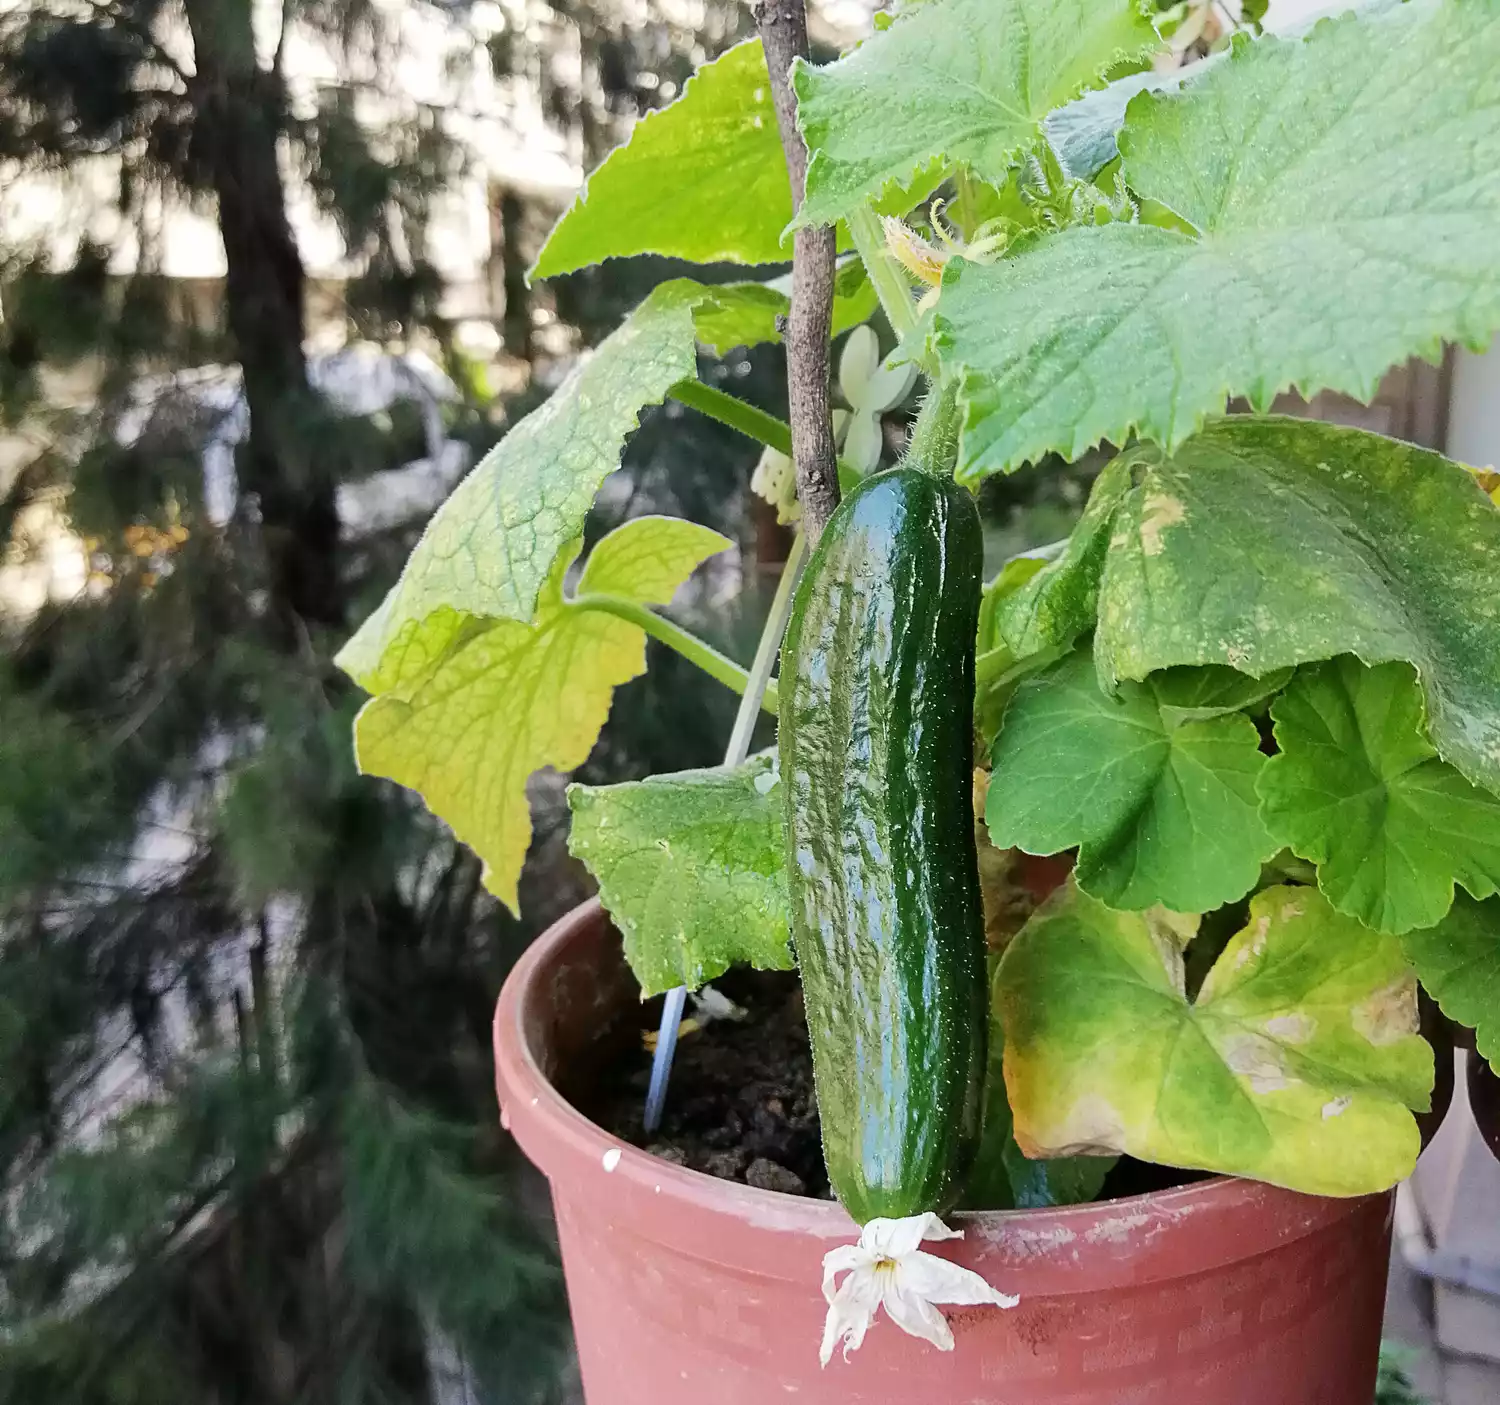 Cucumber plant growing in pot